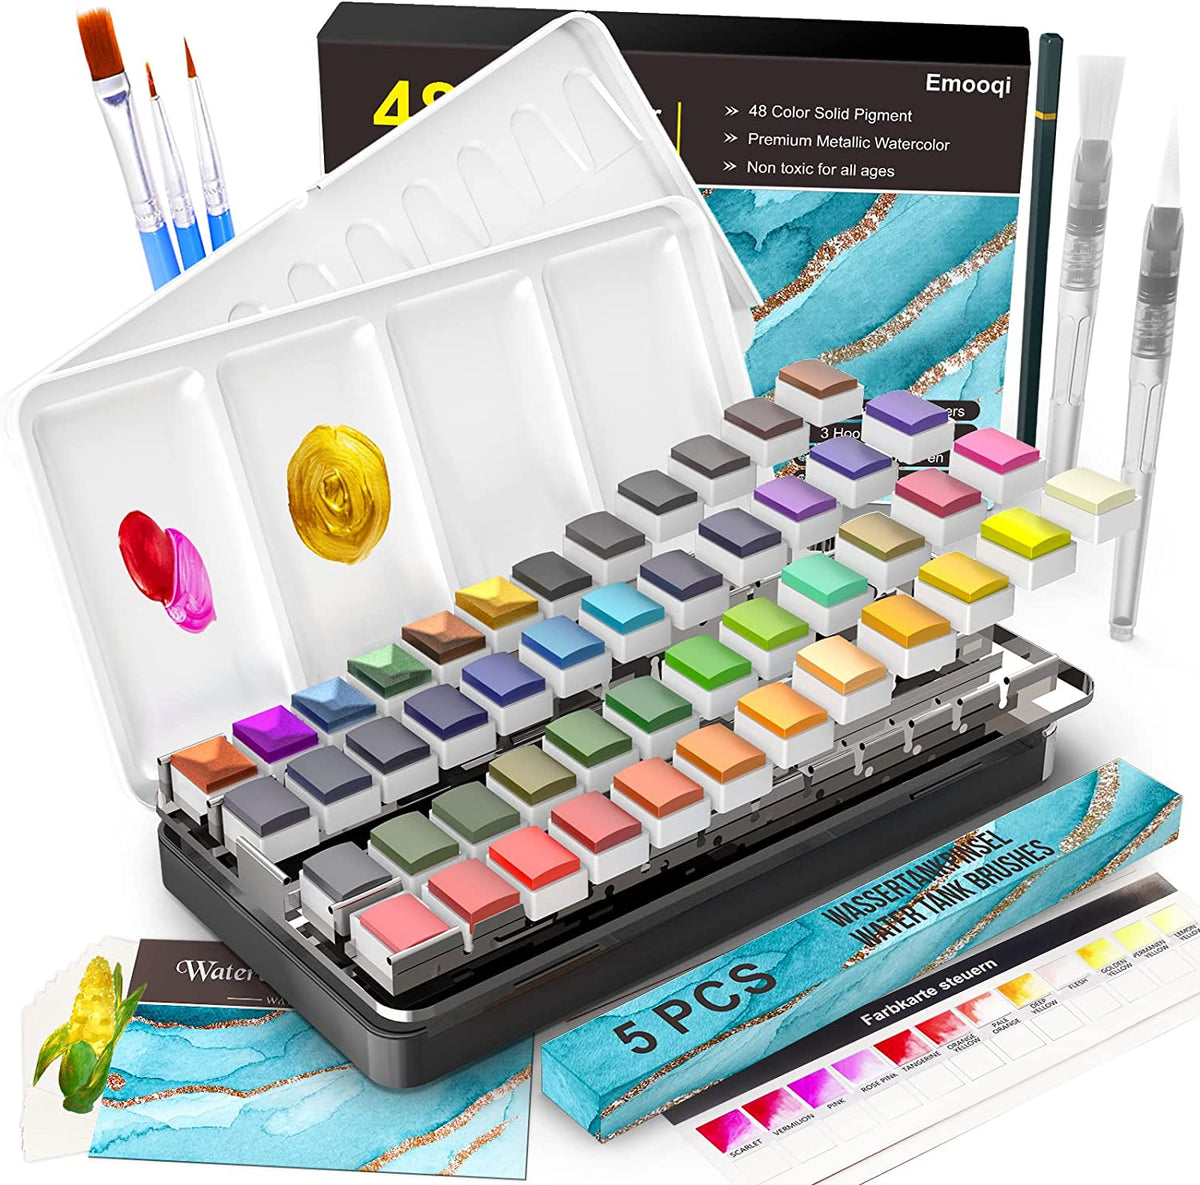 Watercolor Paint Set with 48 Premium Paints, Water Color Paint Set,  Including Metallic and Fluorescent Colors. Perfect Travel Watercolor Set  for Artists, Amateur Hobbyists and Painting Lovers